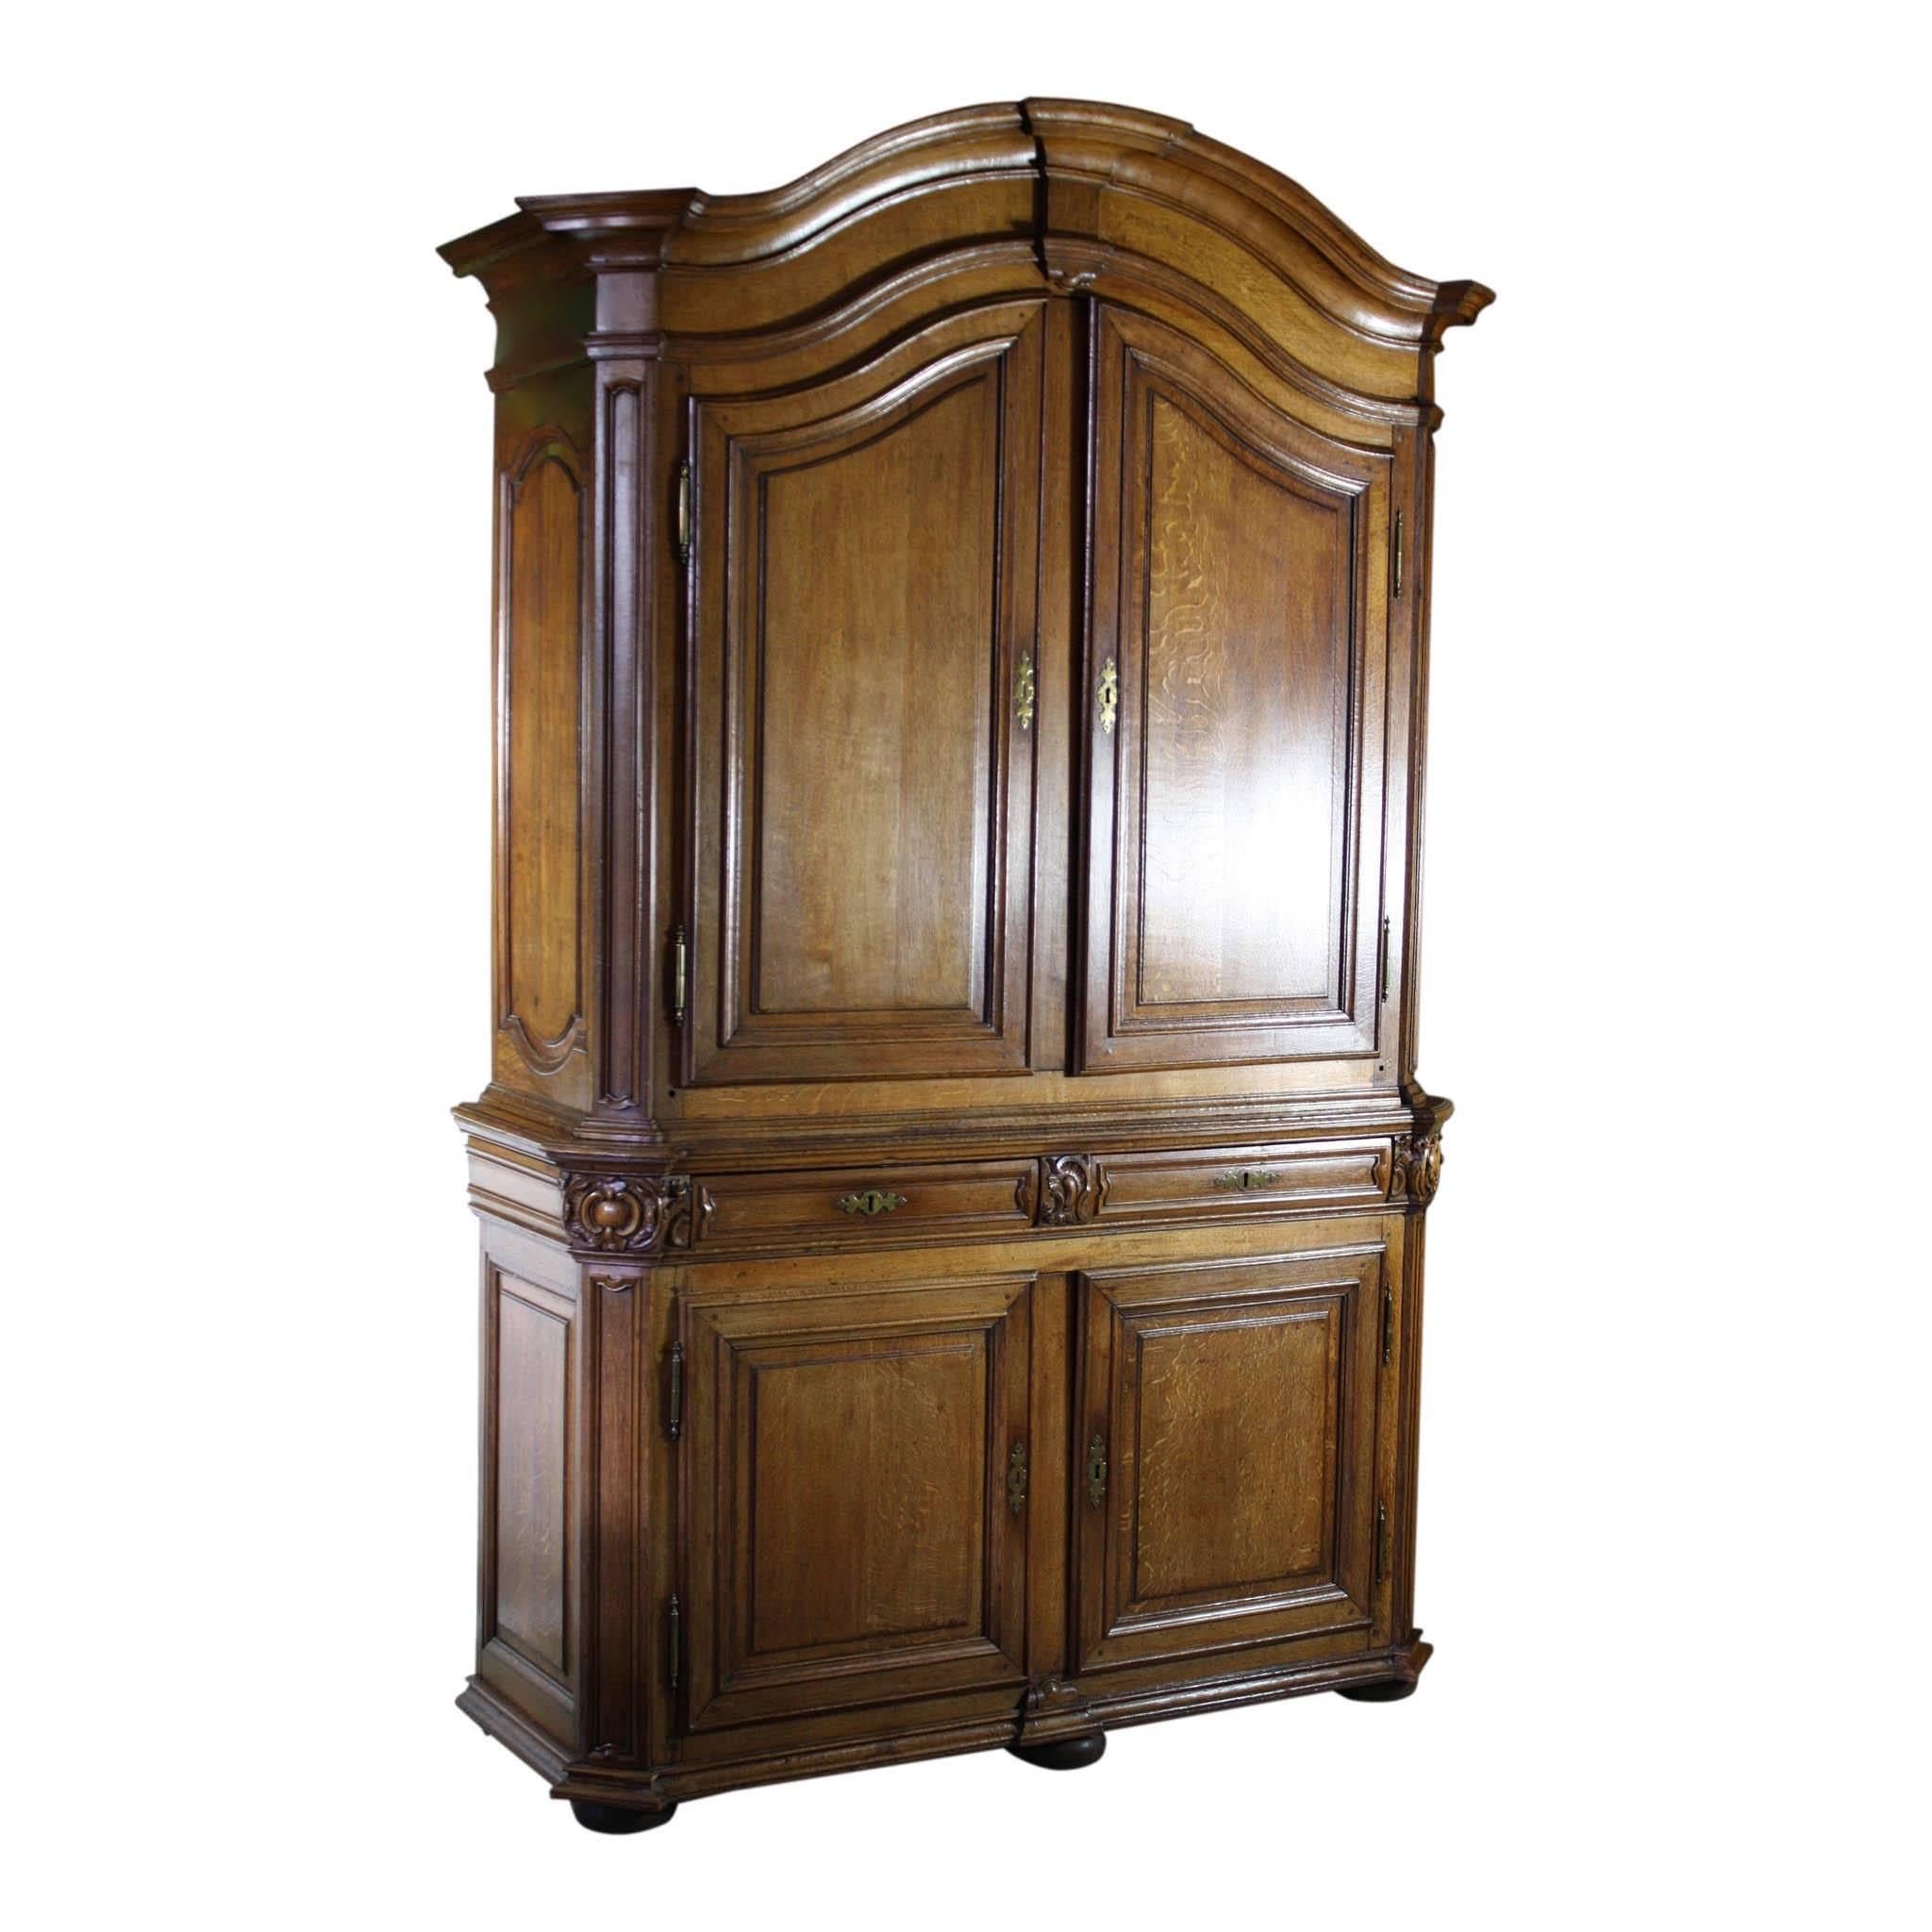 This spacious double bodied cabinet has a gracefully arched crown, two center drawers, brass escutcheons, hinges, iron interior door locks and bun feet. The upper portion has two scalloped shelves. Height of lower portion is 41 inches. No key.